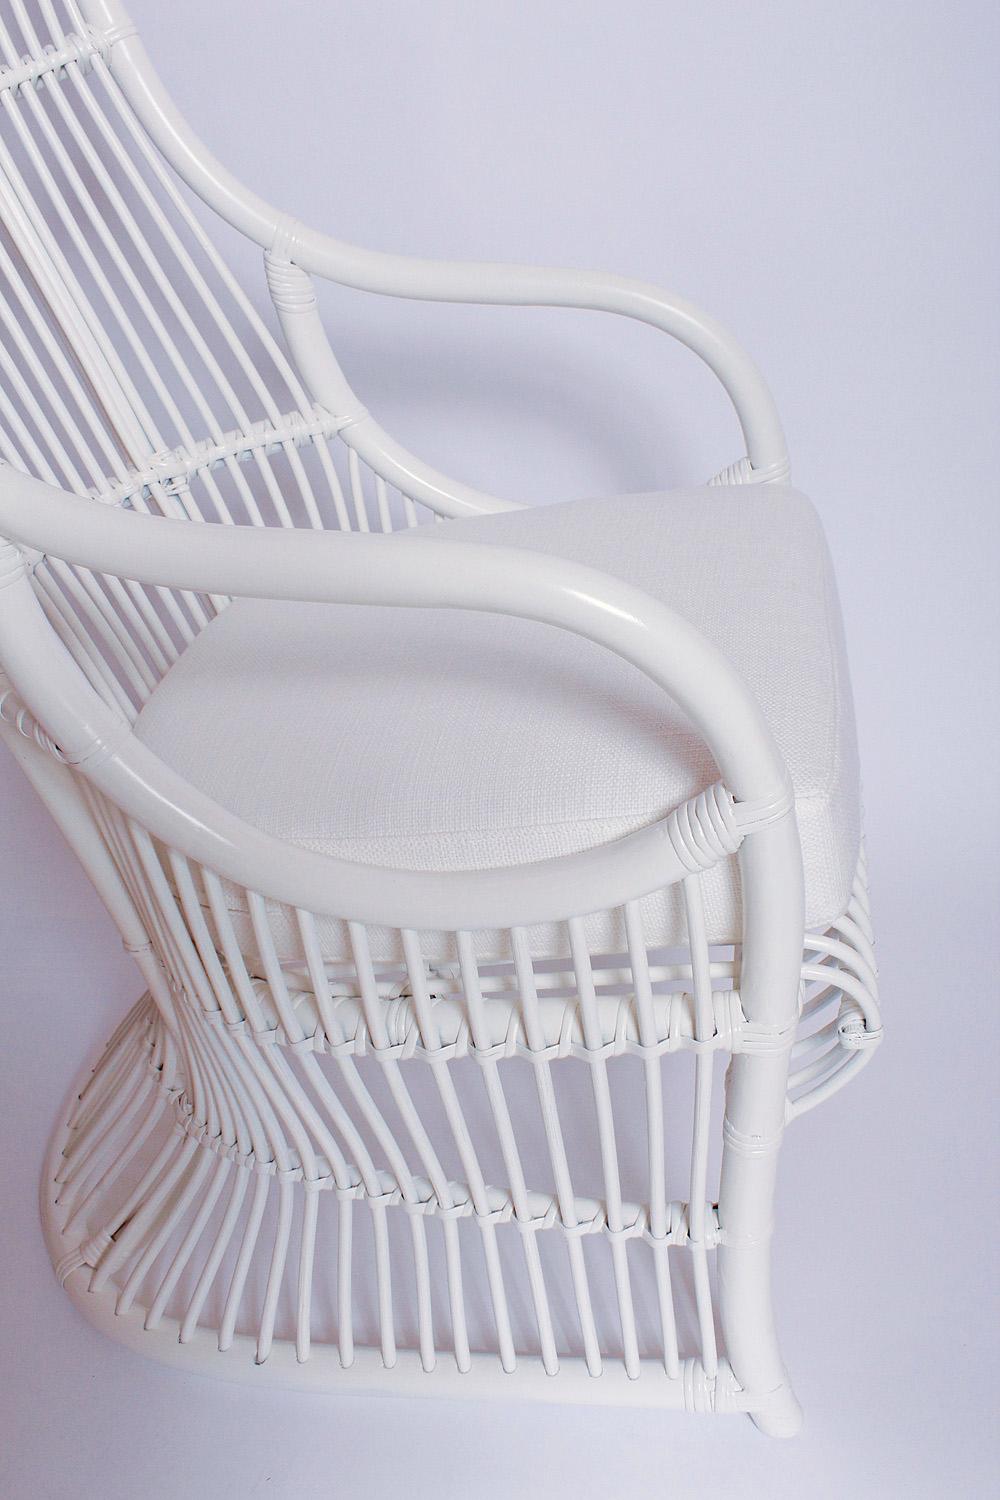 American White Bamboo and Rattan Canopy Chair by Henry Olko for Willow and Reed